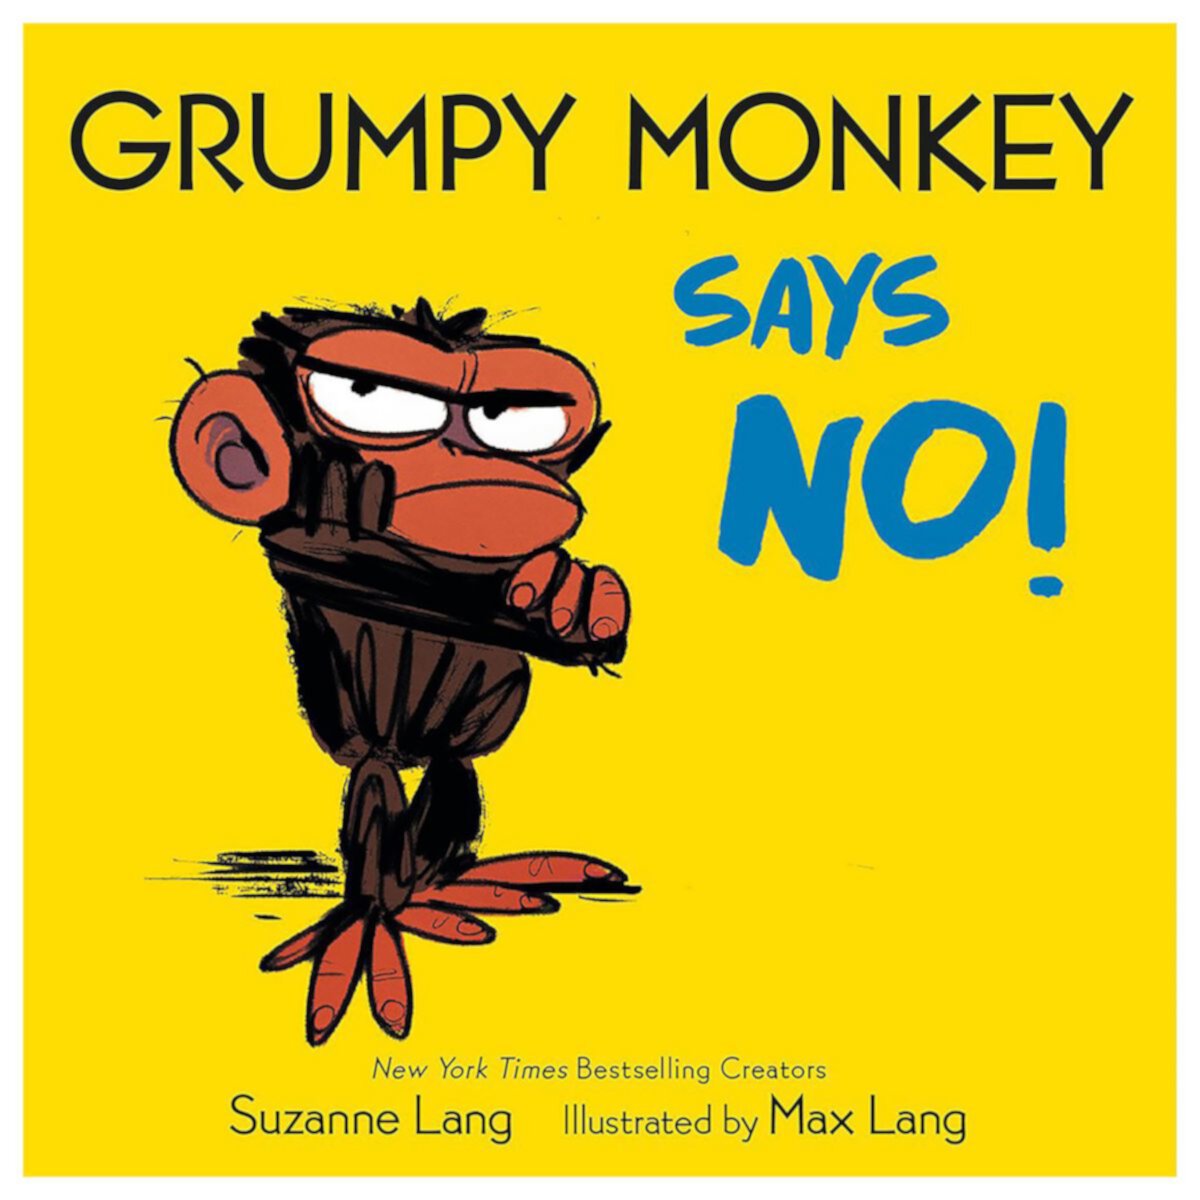 Grumpy Monkey Says No! by Suzanne Lang Children's Book Penguin Random House